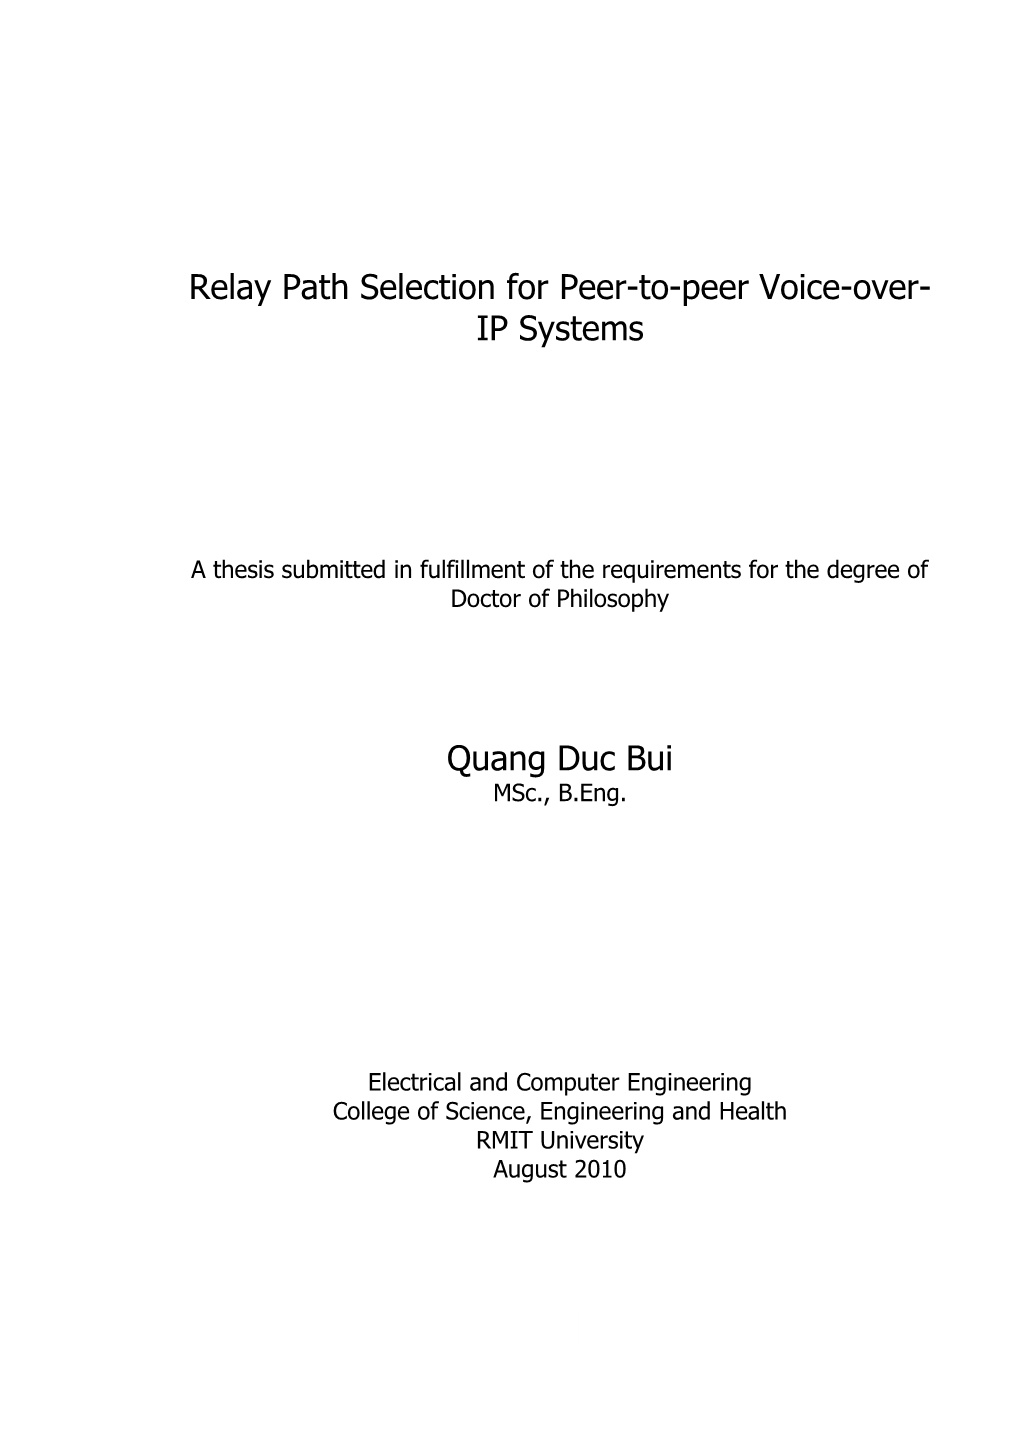 Relay Path Selection for Peer-To-Peer Voice-Over- IP Systems